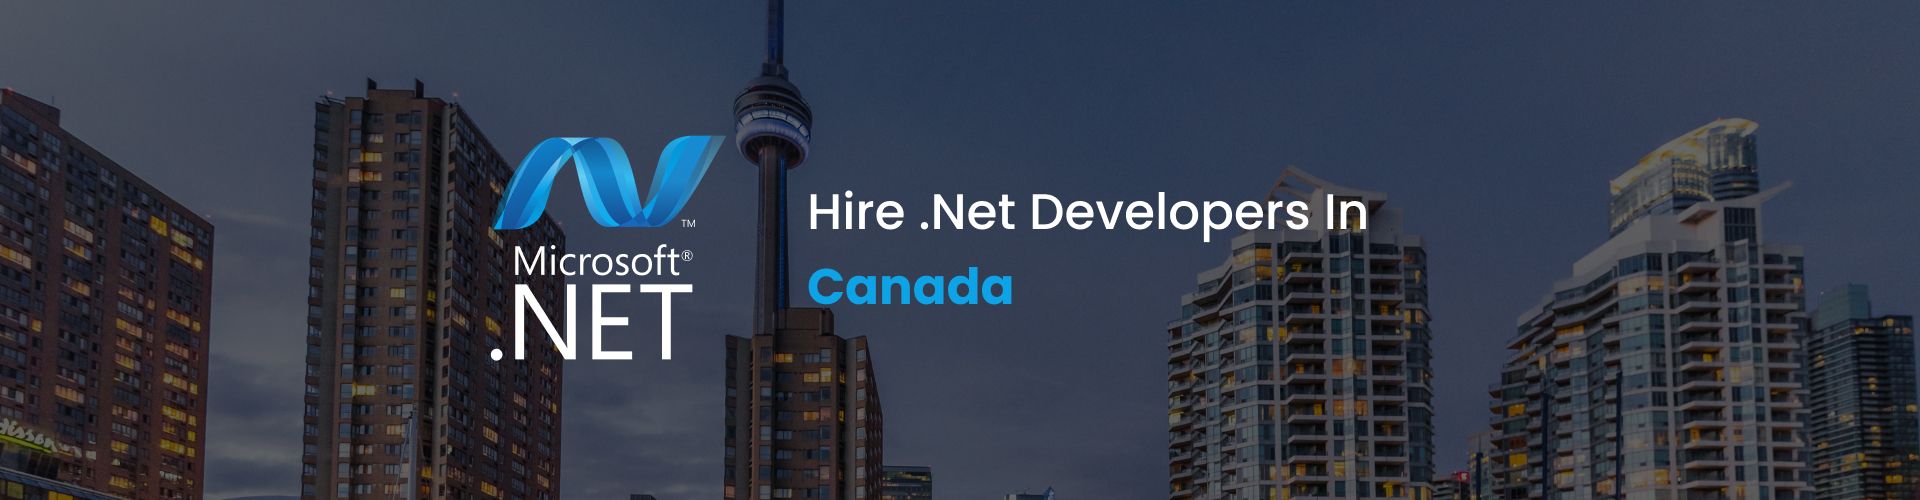 hire .net developers in canada